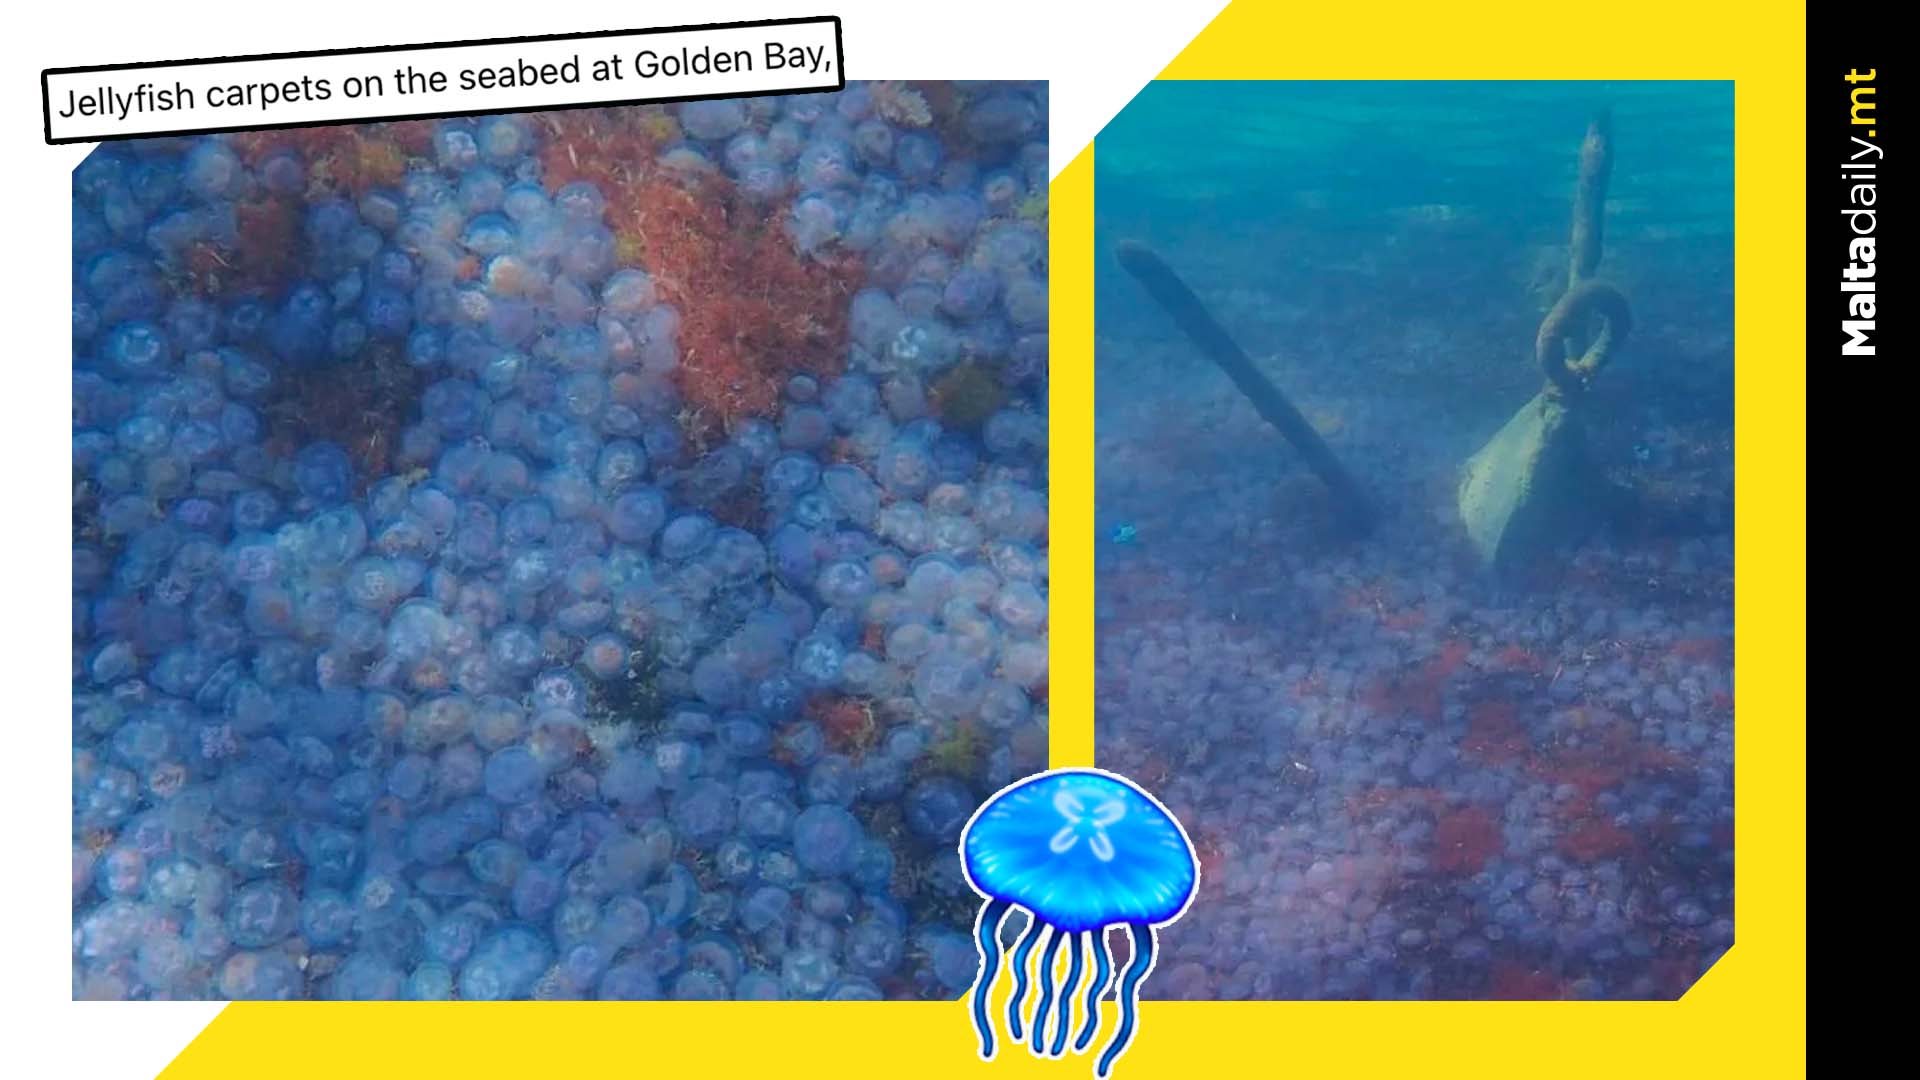 Massive jellyfish carpet spotted at Golden Bay seabed